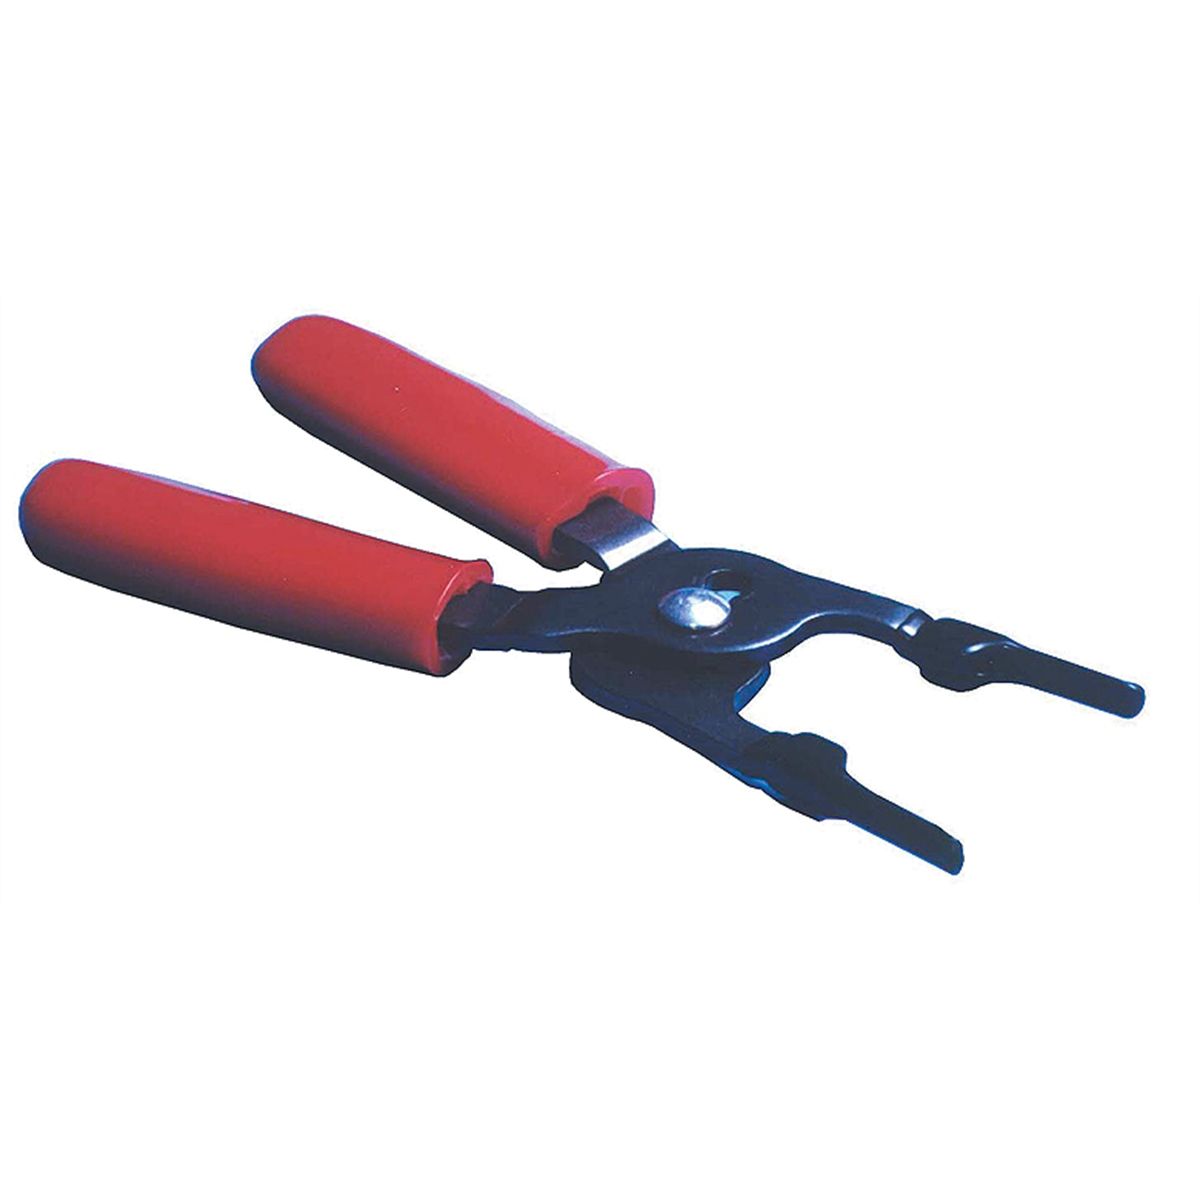 Relay & Fusible Link Slip Joint Pliers